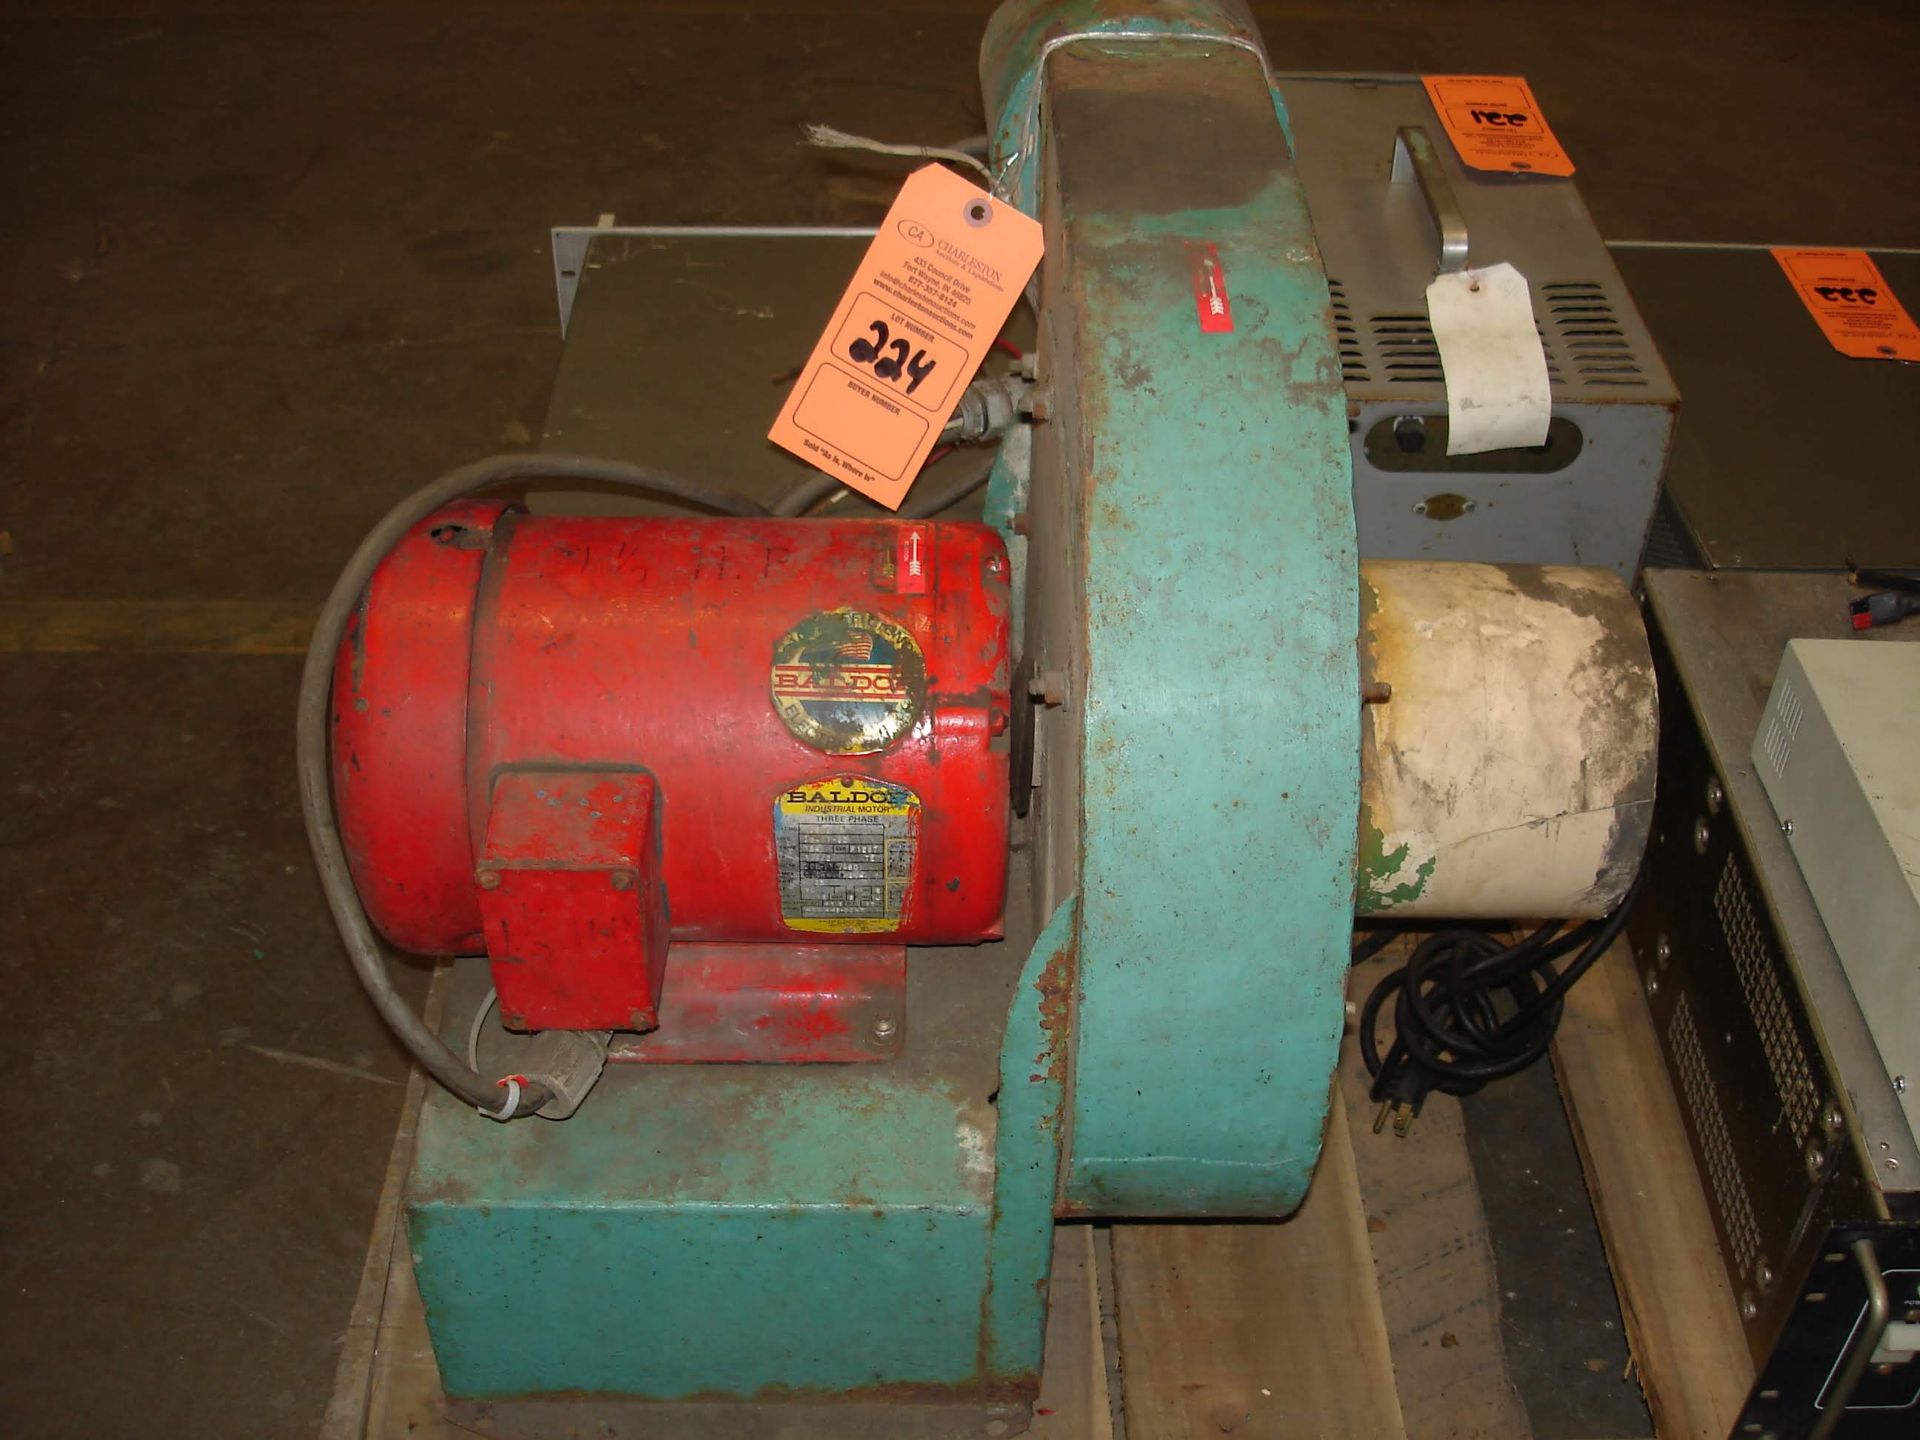 (1) BLOWER UNIT WITH BALDOR MOTOR M3606 1 1/2HP 1125RPM REFER TO PHOTOS!